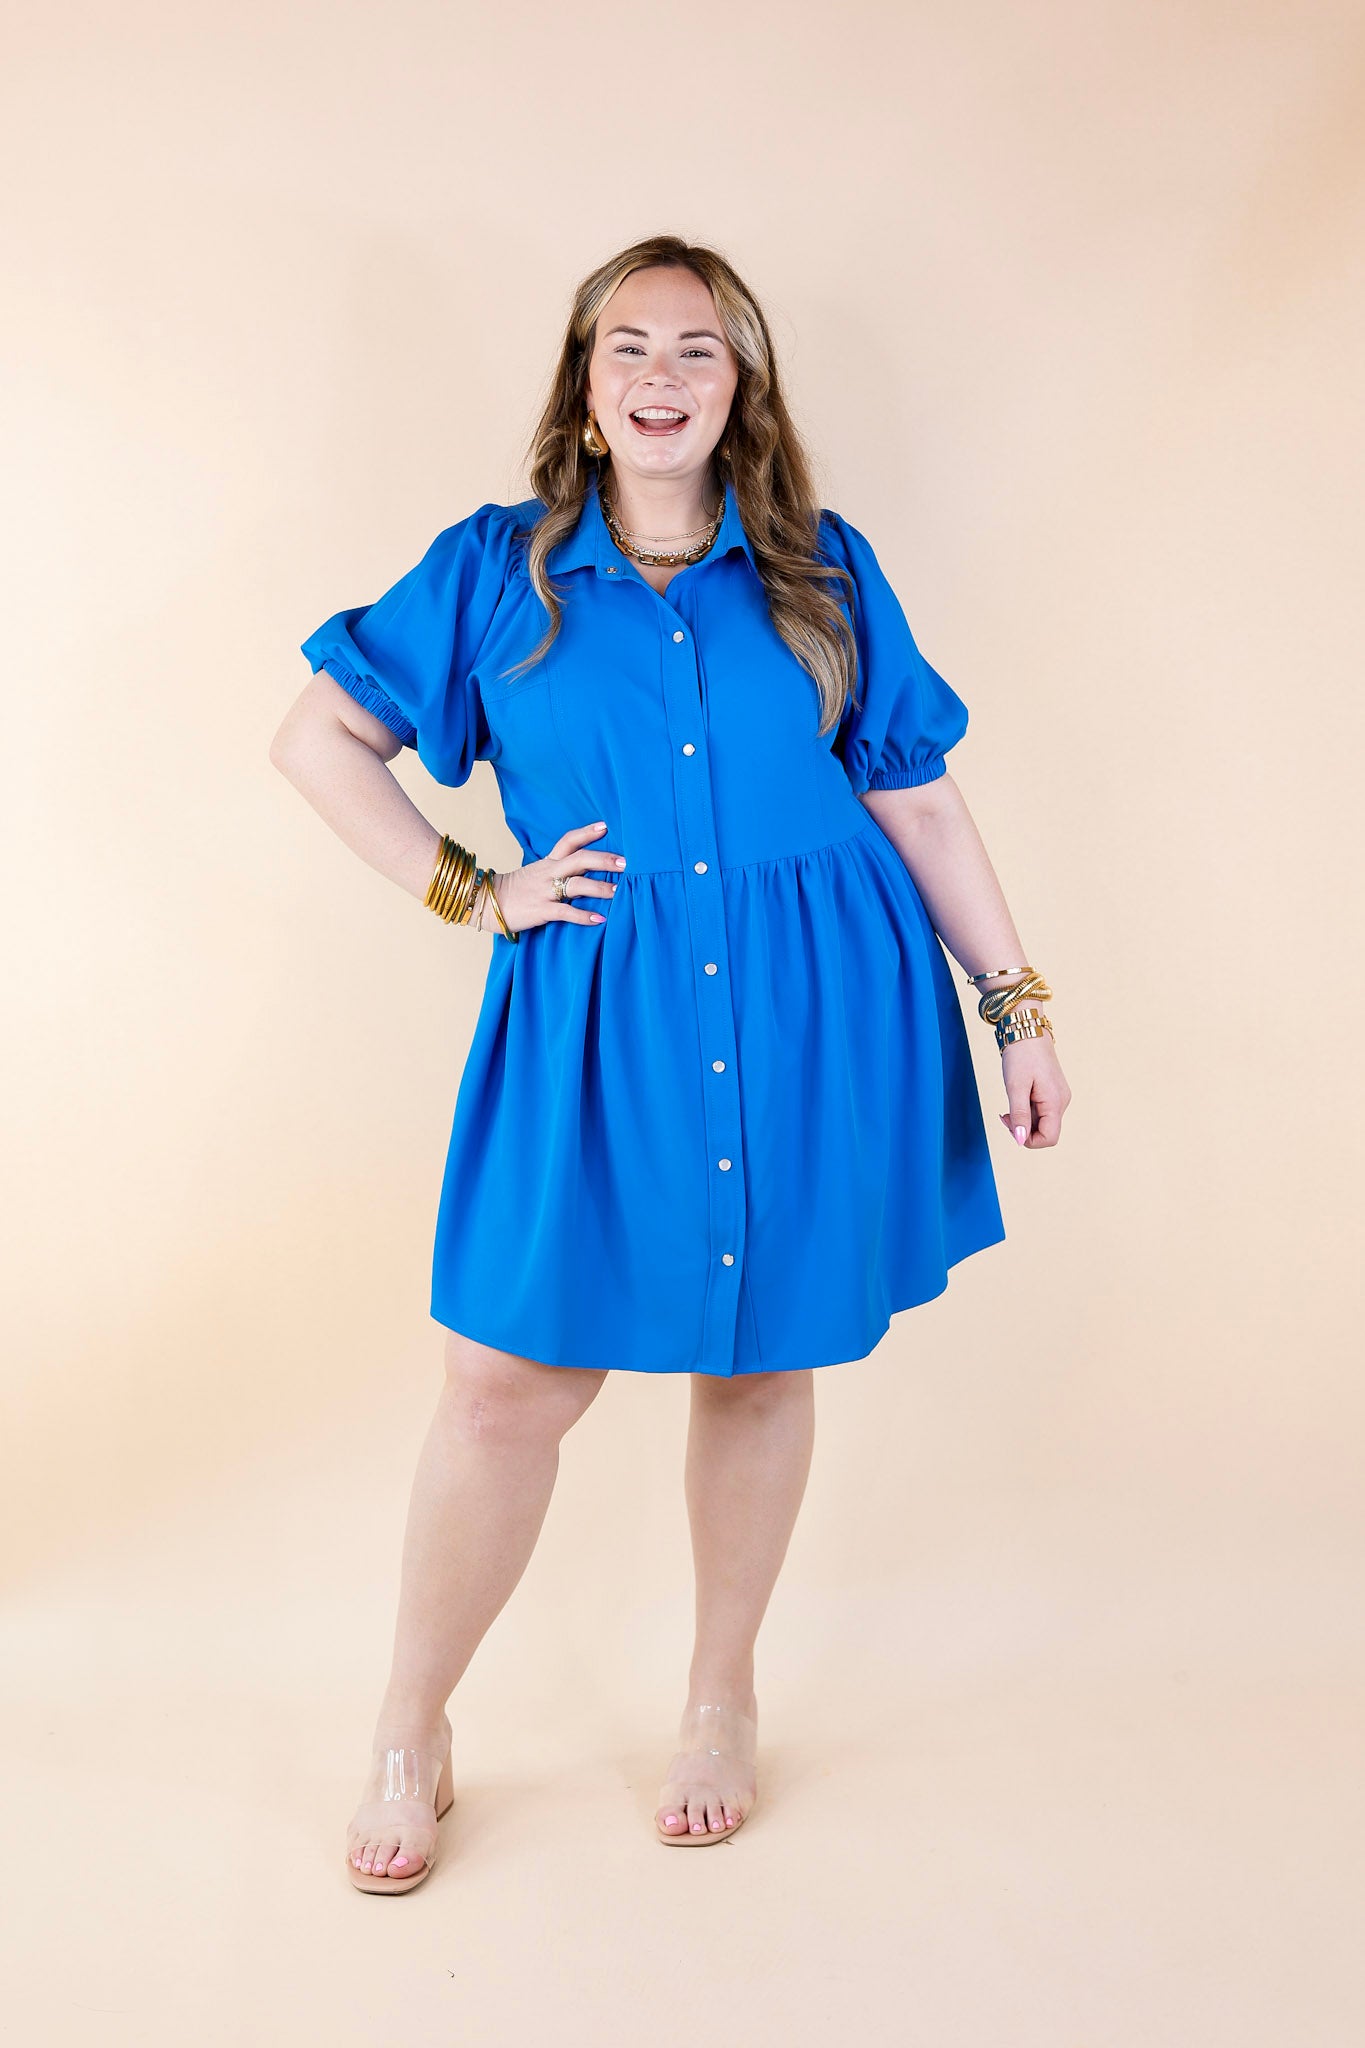 Adventures Ahead Button Up Babydoll Dress in Bright Blue - Giddy Up Glamour Boutique